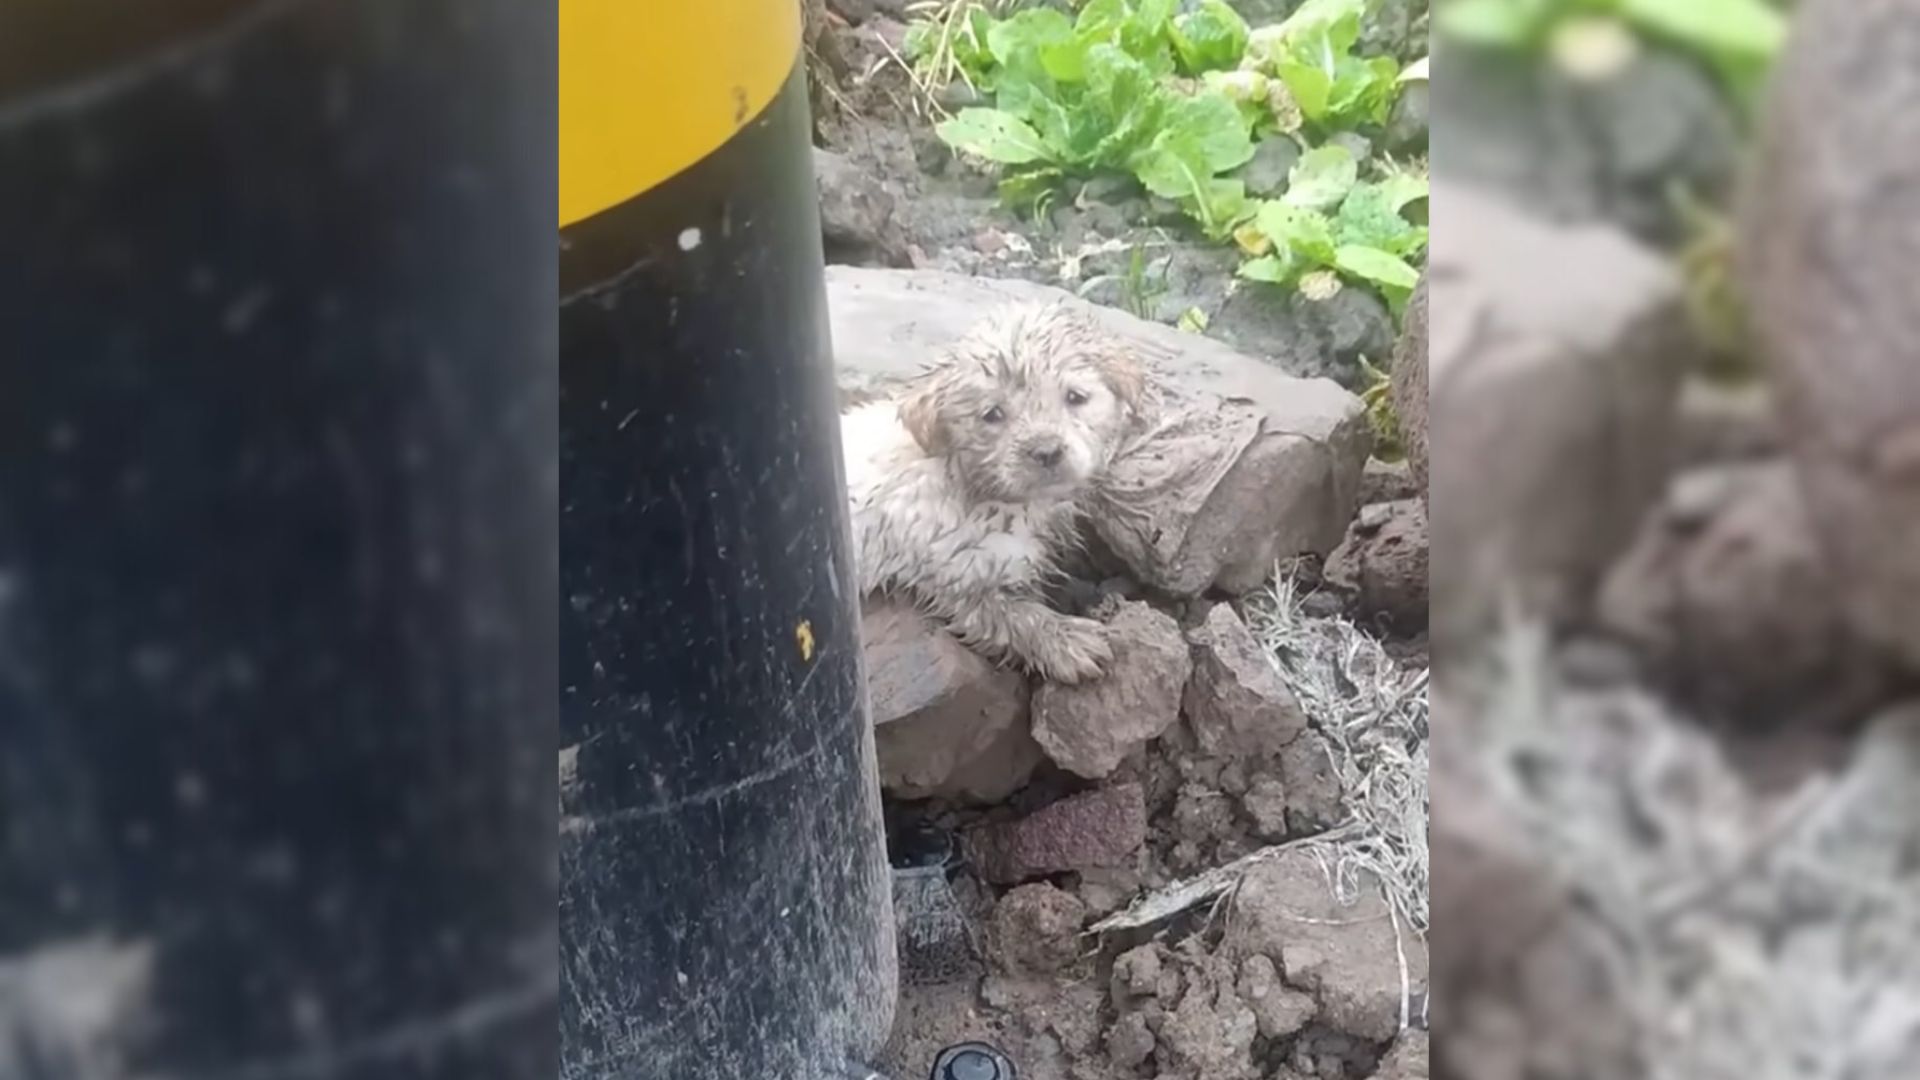 This Puppy Was Found All Covered In Mud On The Side Of The Road, Hoping To Find Help